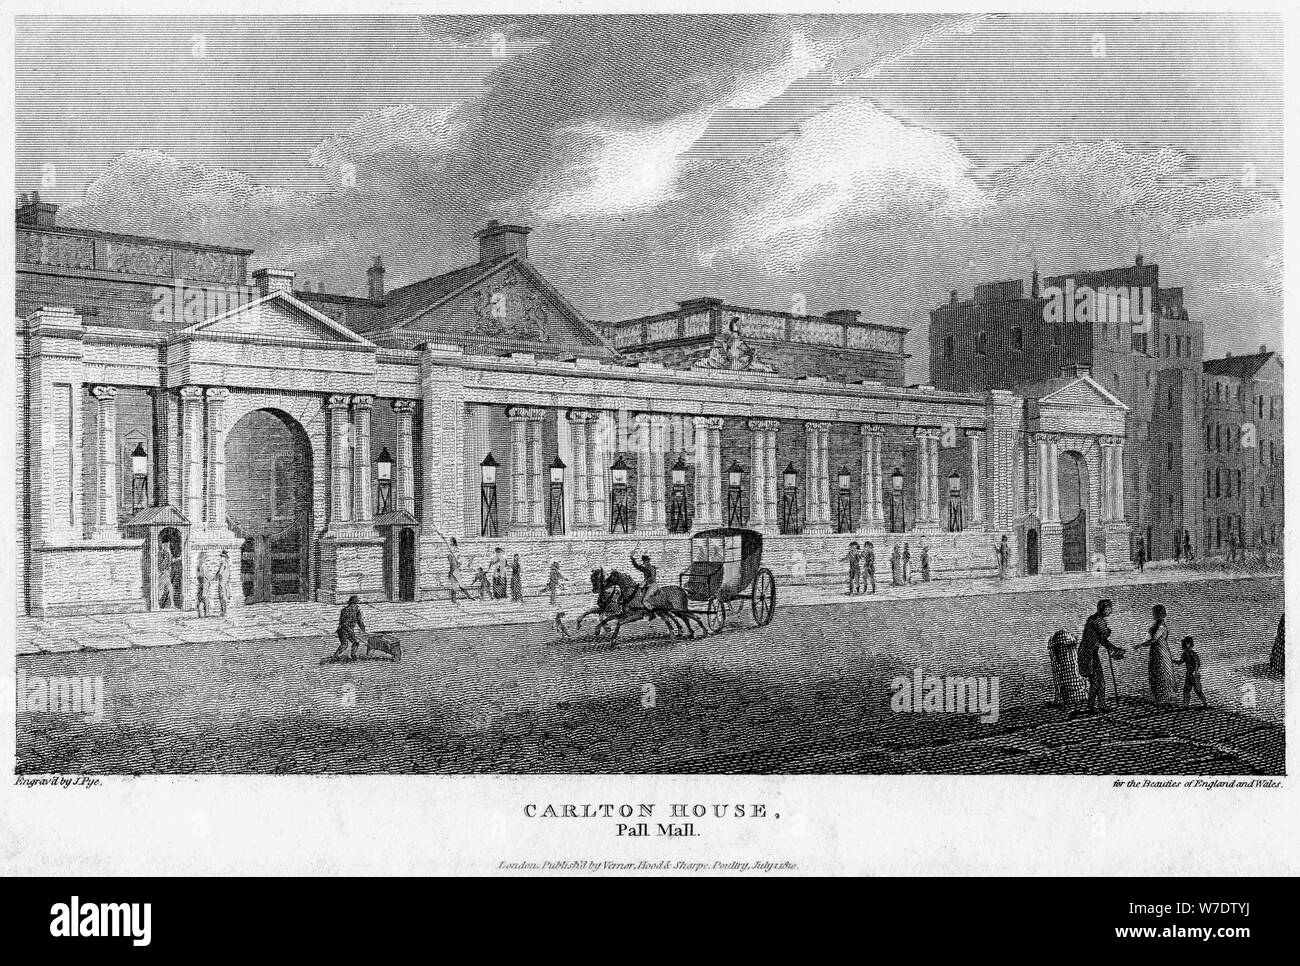 Carlton House, Pall Mall, Westminster, Londres, 1810.Artiste : J Pye Banque D'Images